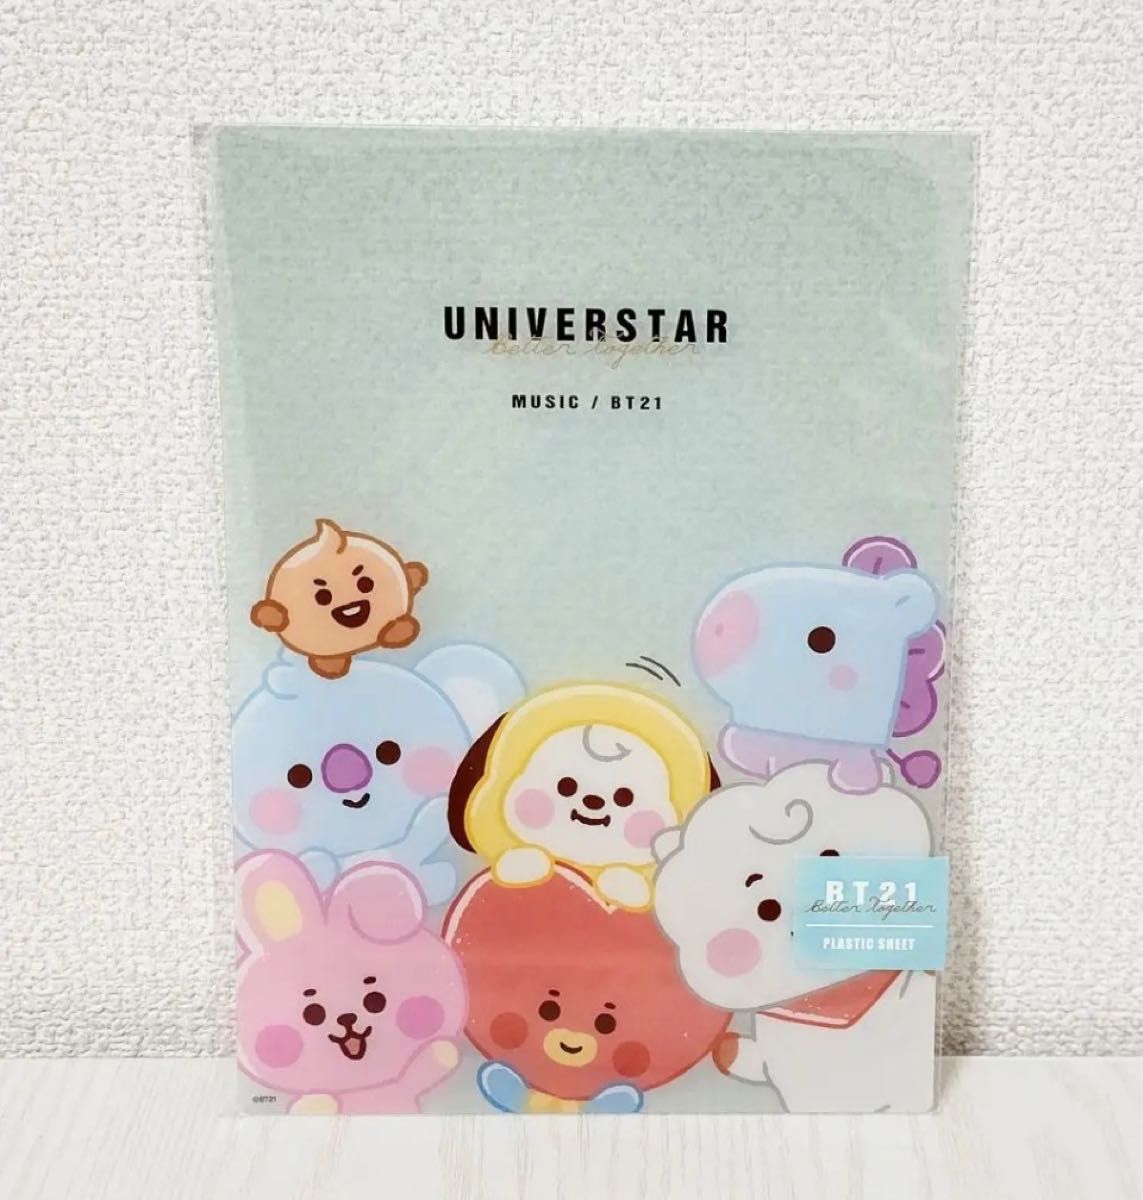 BT21 ＊ LINE FRIENDS    ☆ A4ファイル + 方眼ノート + 下じき   3点セット